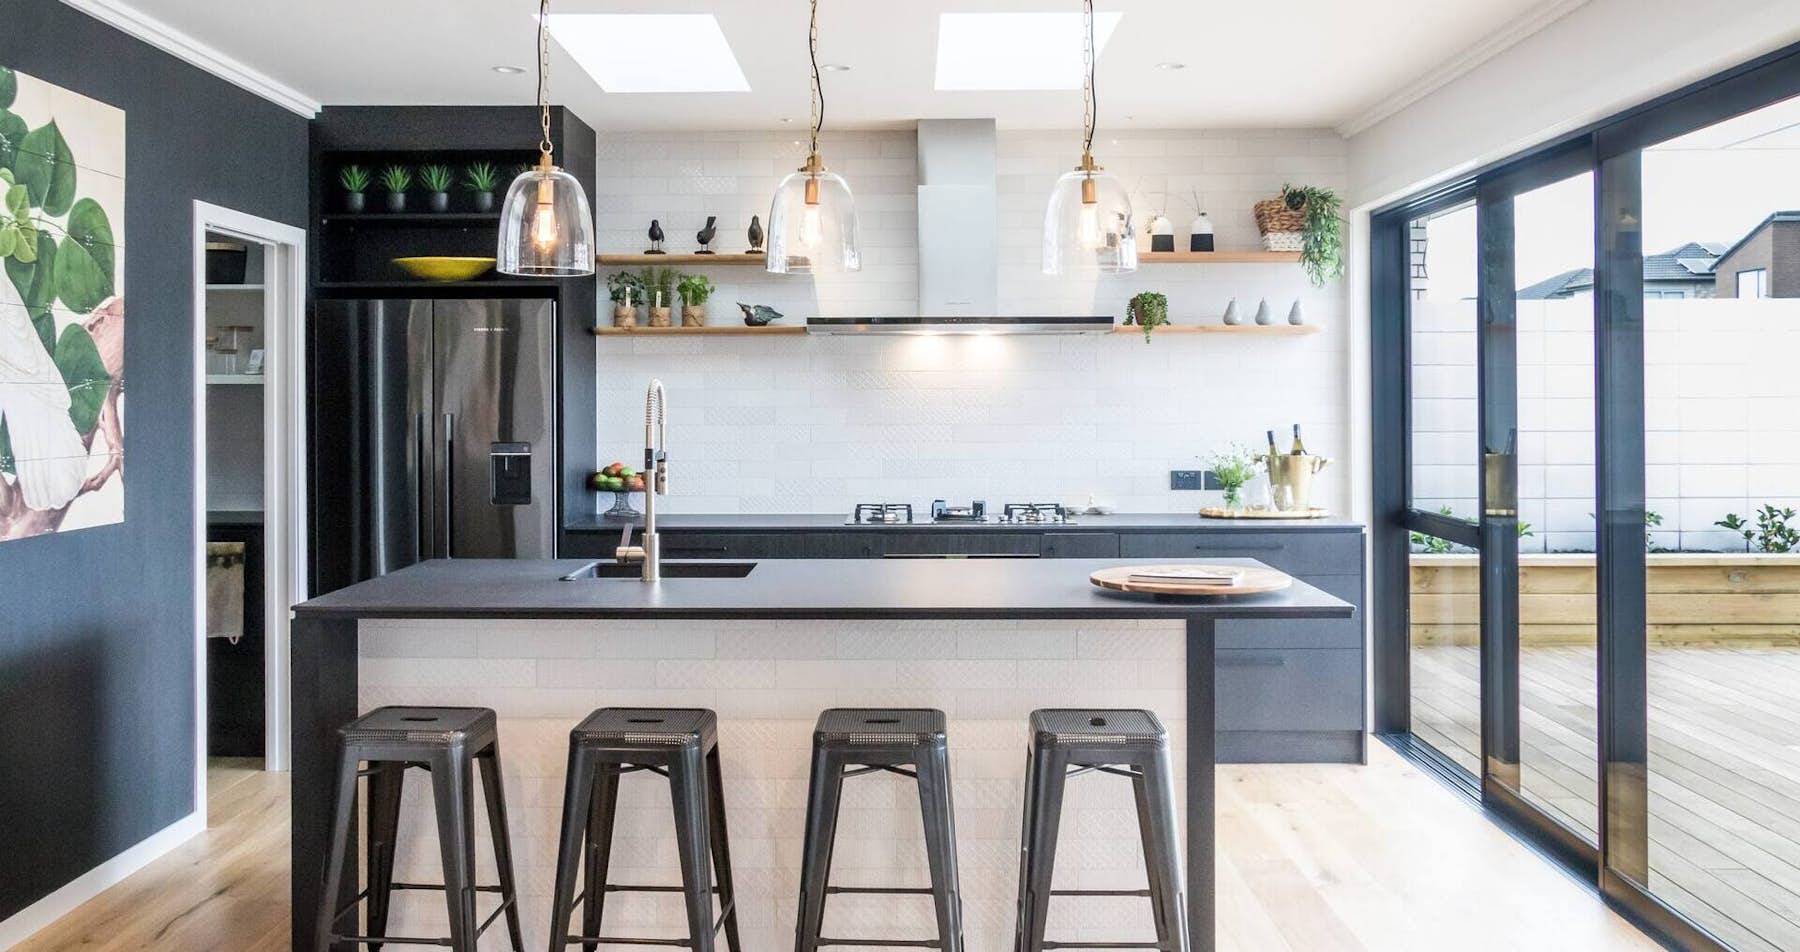 Why these home features are trending in NZ right now